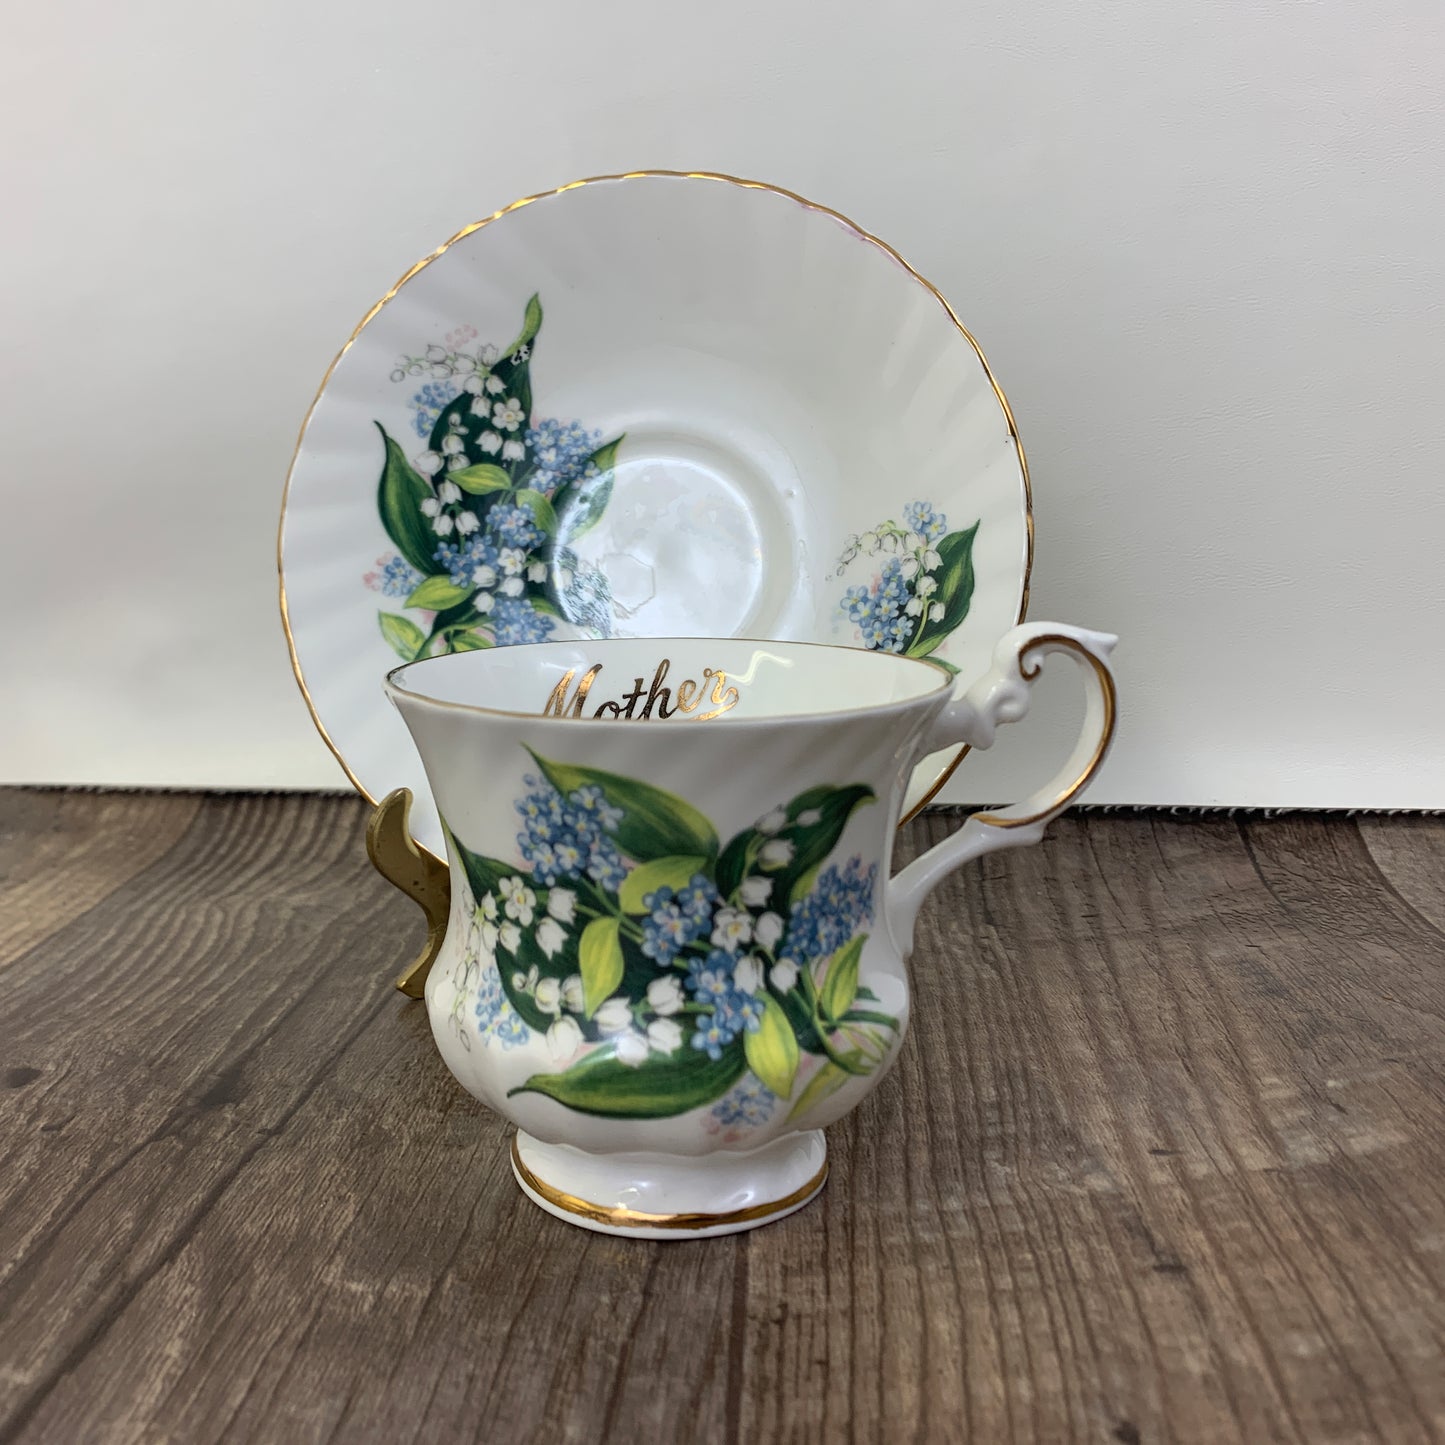 Lily of the Valley Teacup, Gift for Mother, Blue and White Floral Pattern Tea Cup